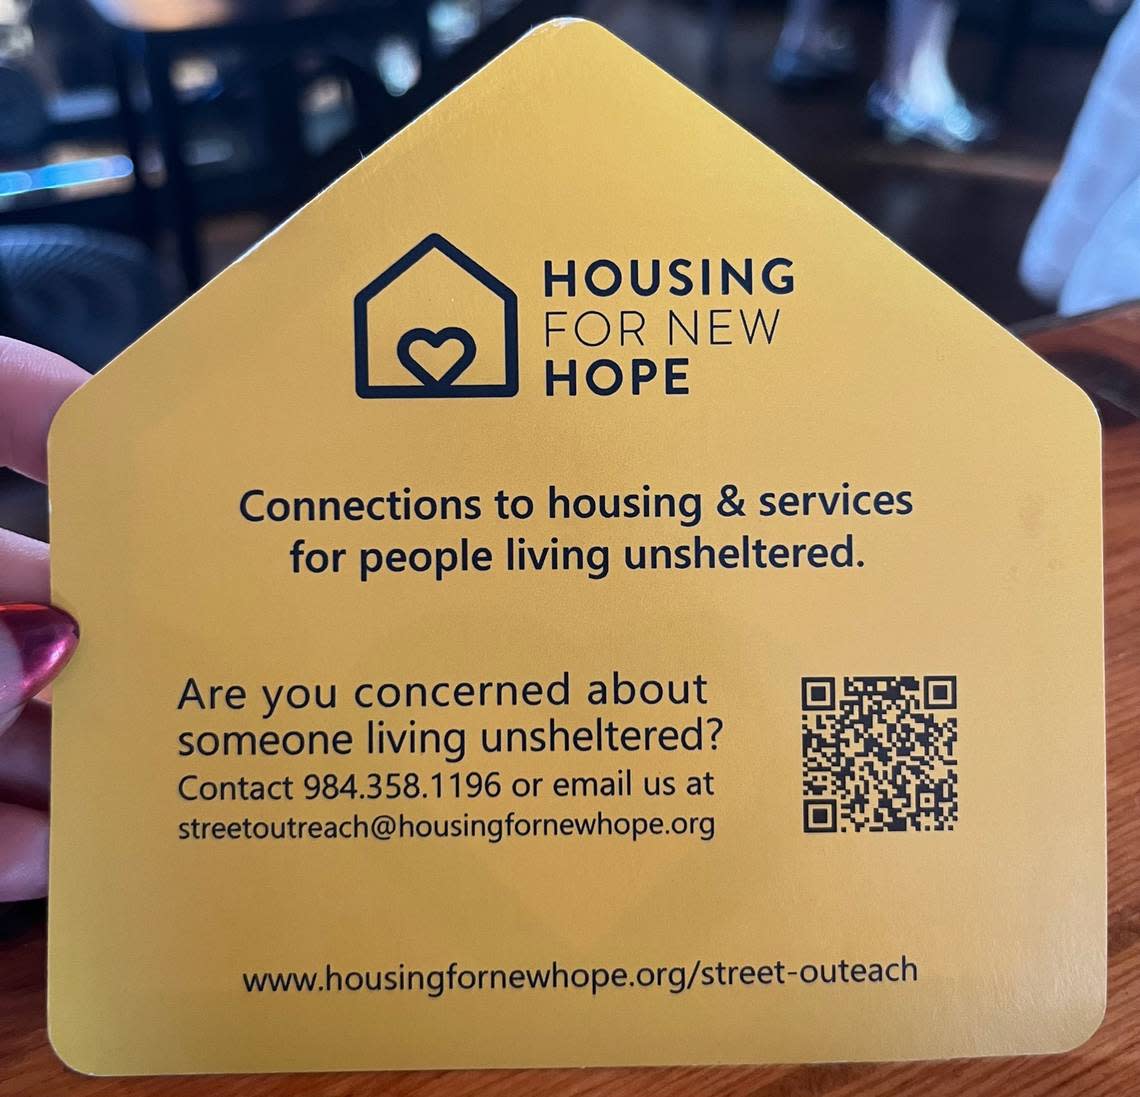 Housing for New Hope helps connect Durham’s unsheltered and homeless to housing and services.